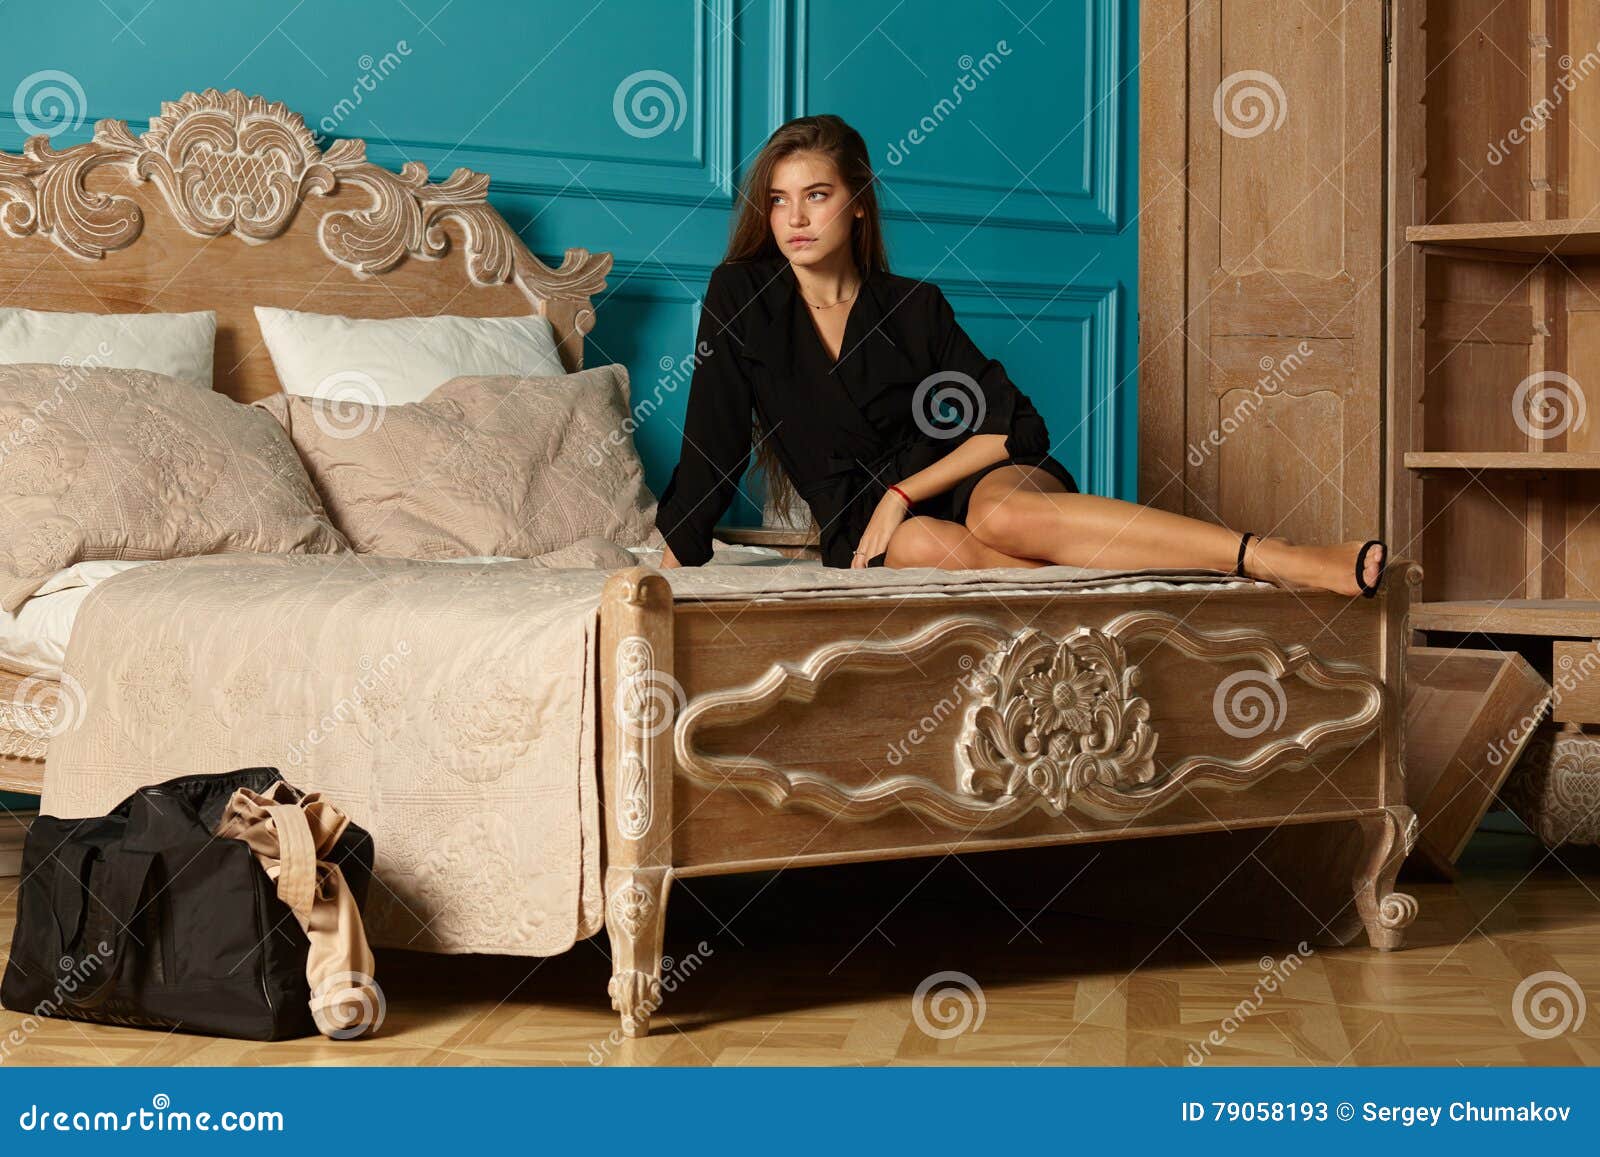 Adult Attractive Girl In Hotel Room Stock Image Image Of Hotel Female 79058193